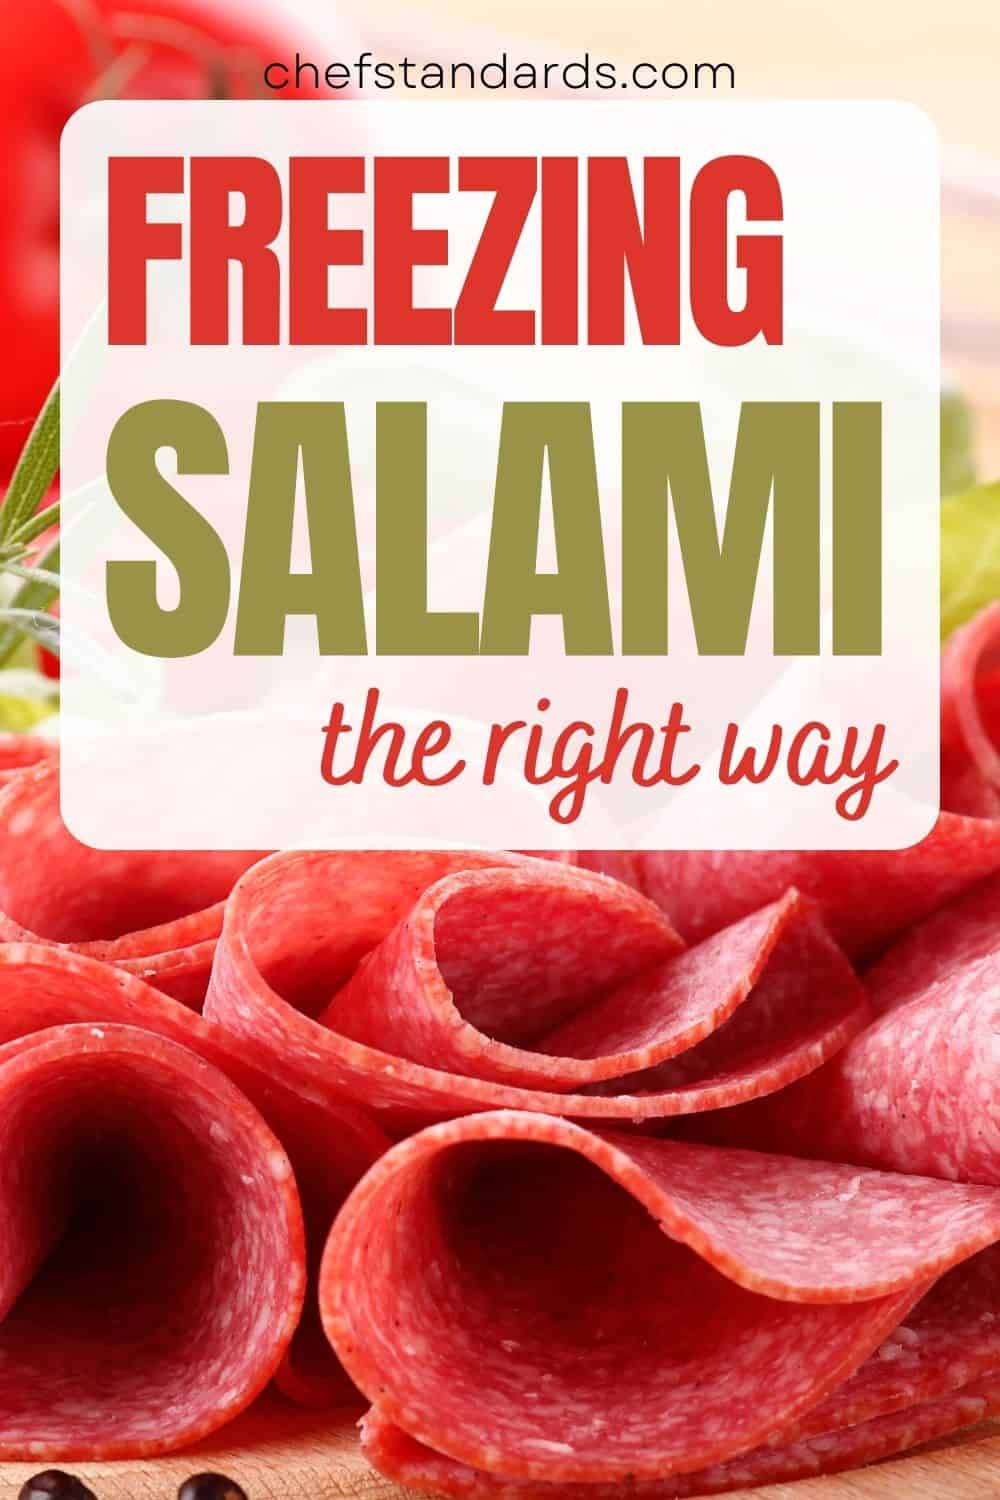 Can You Freeze Salami? Key Facts Everyone Needs To Know
